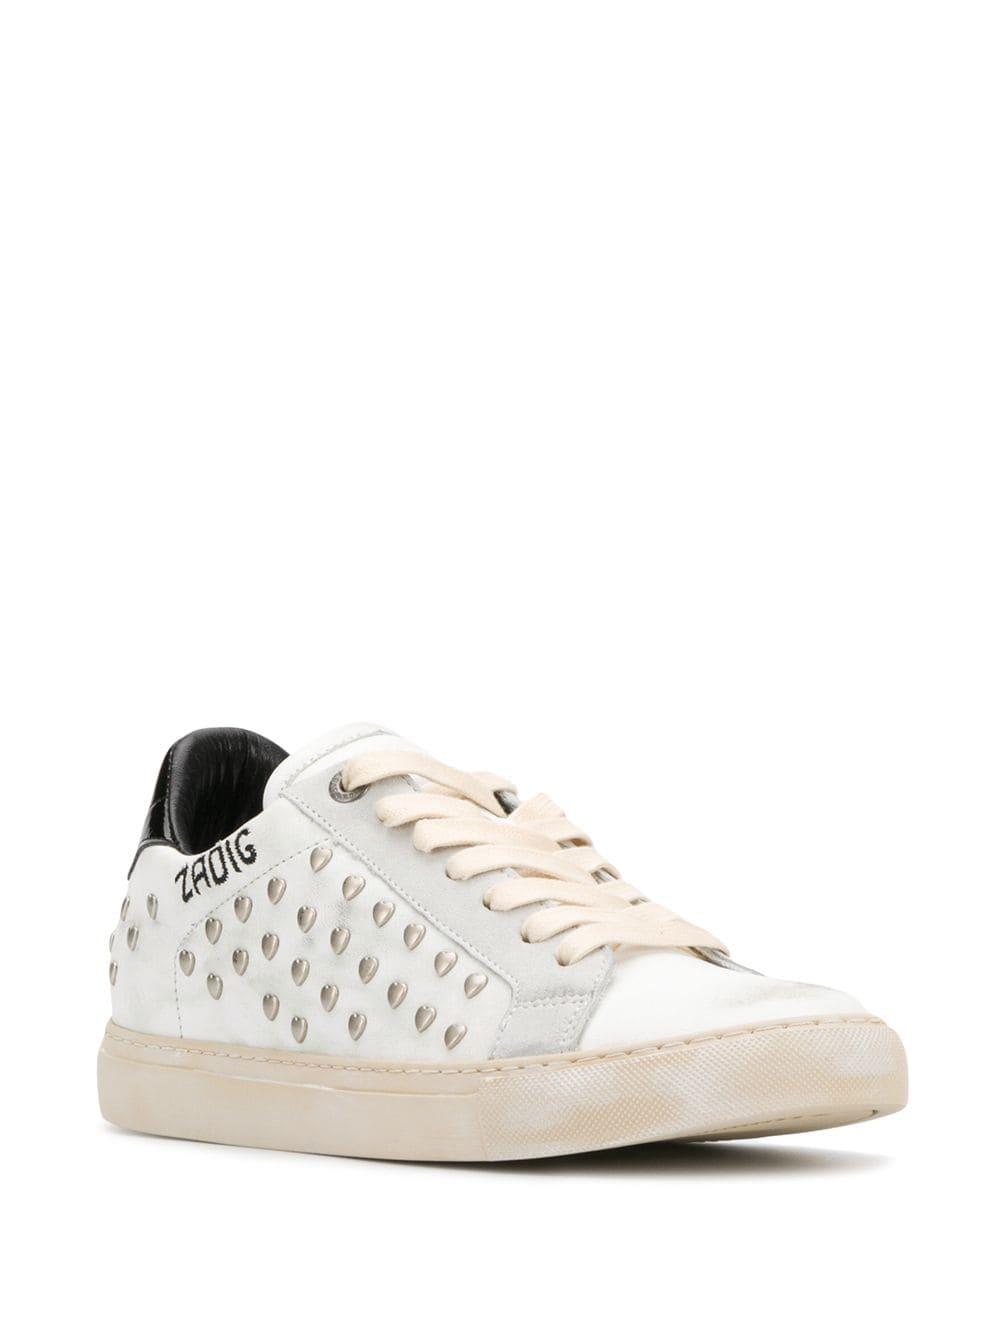 Zadig & Voltaire Heart Studded Sneakers in White | Lyst